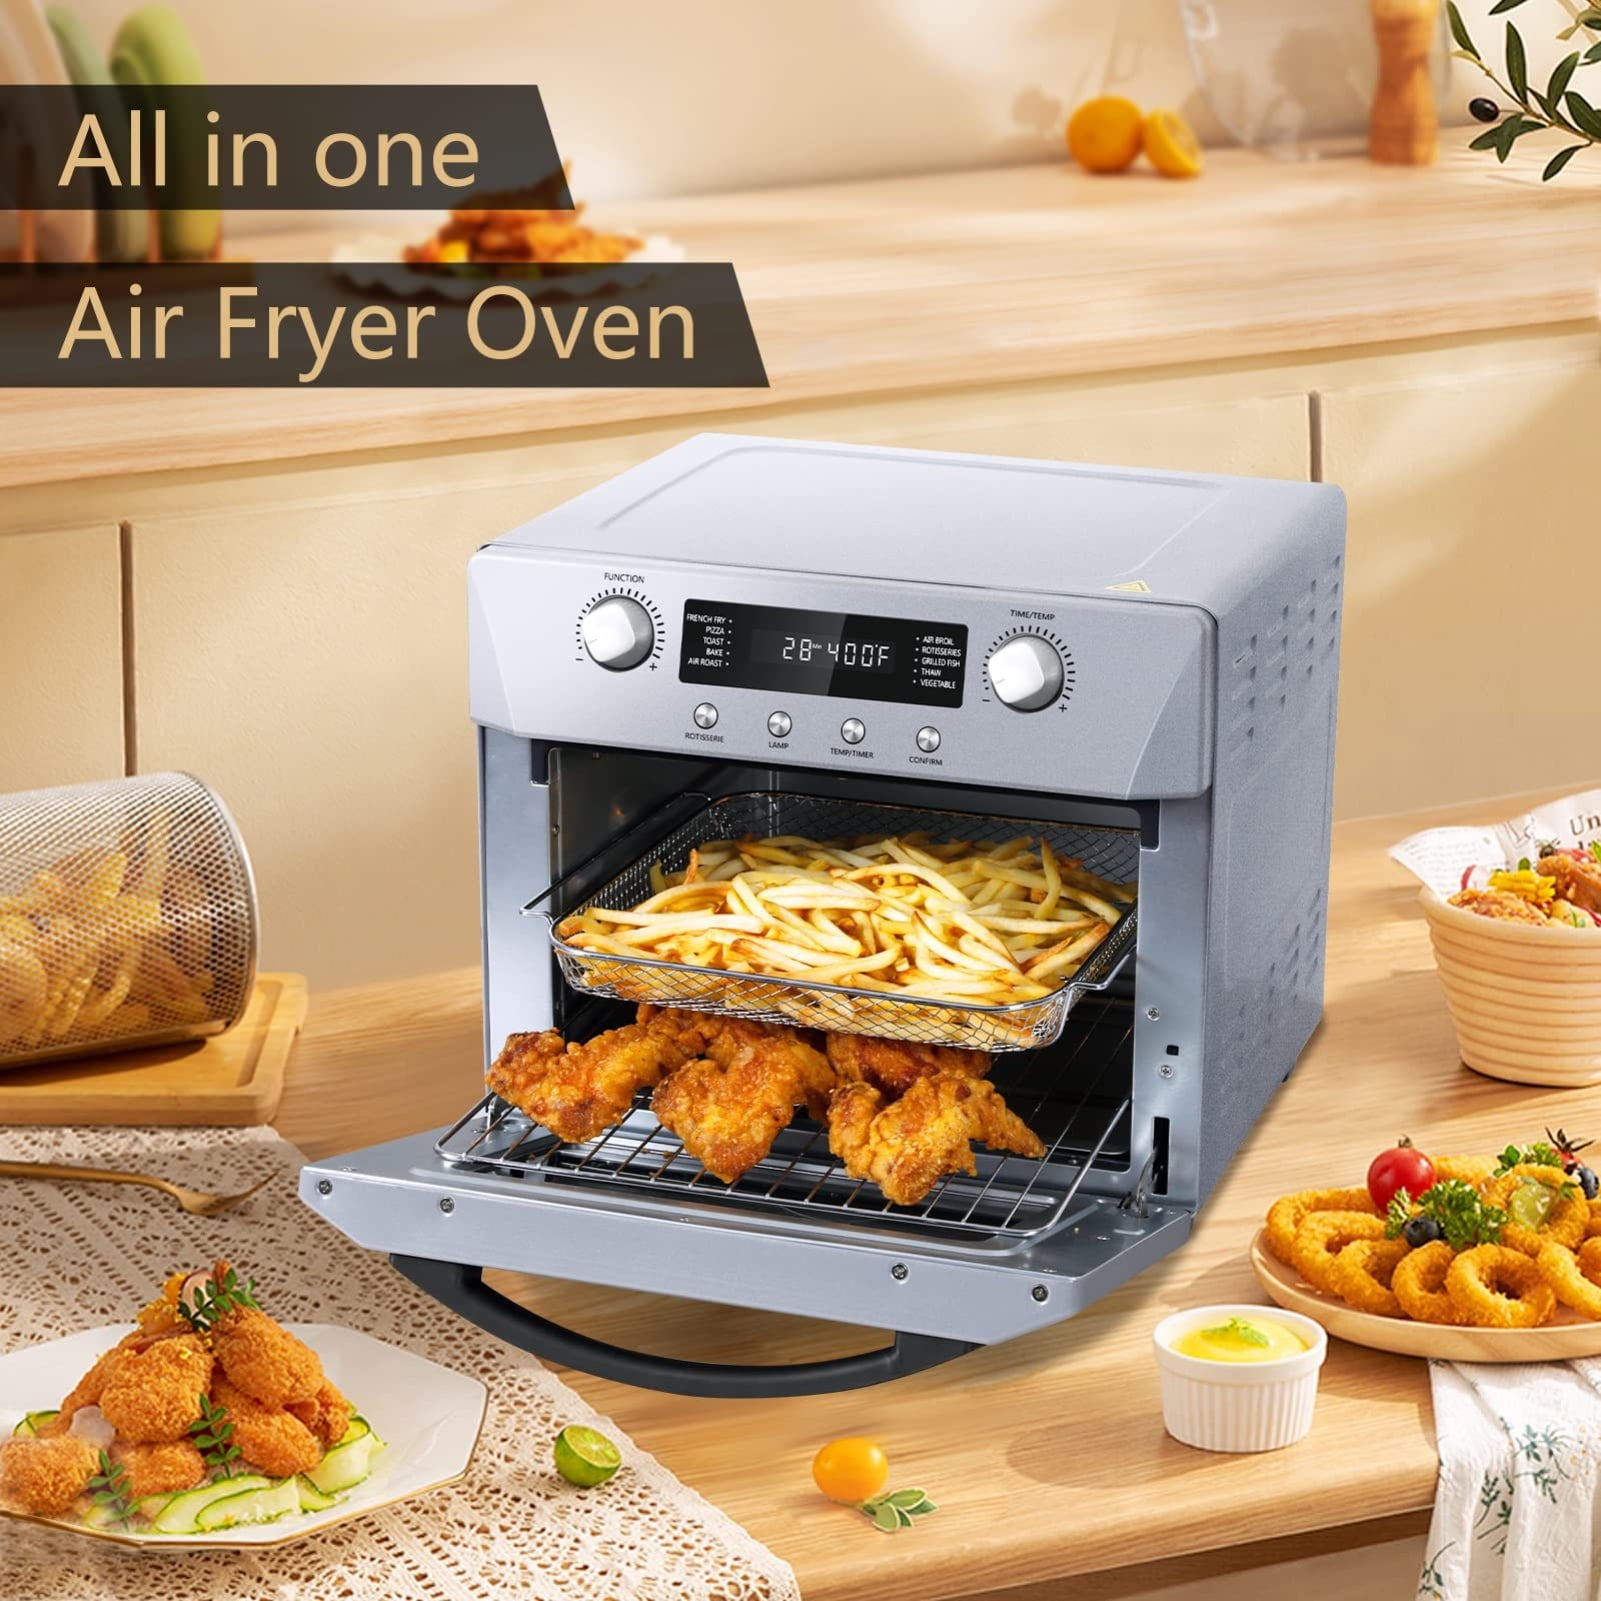 CUSIMAX Toaster Oven, 15.5 Quart Air Fryer Combo • Price »